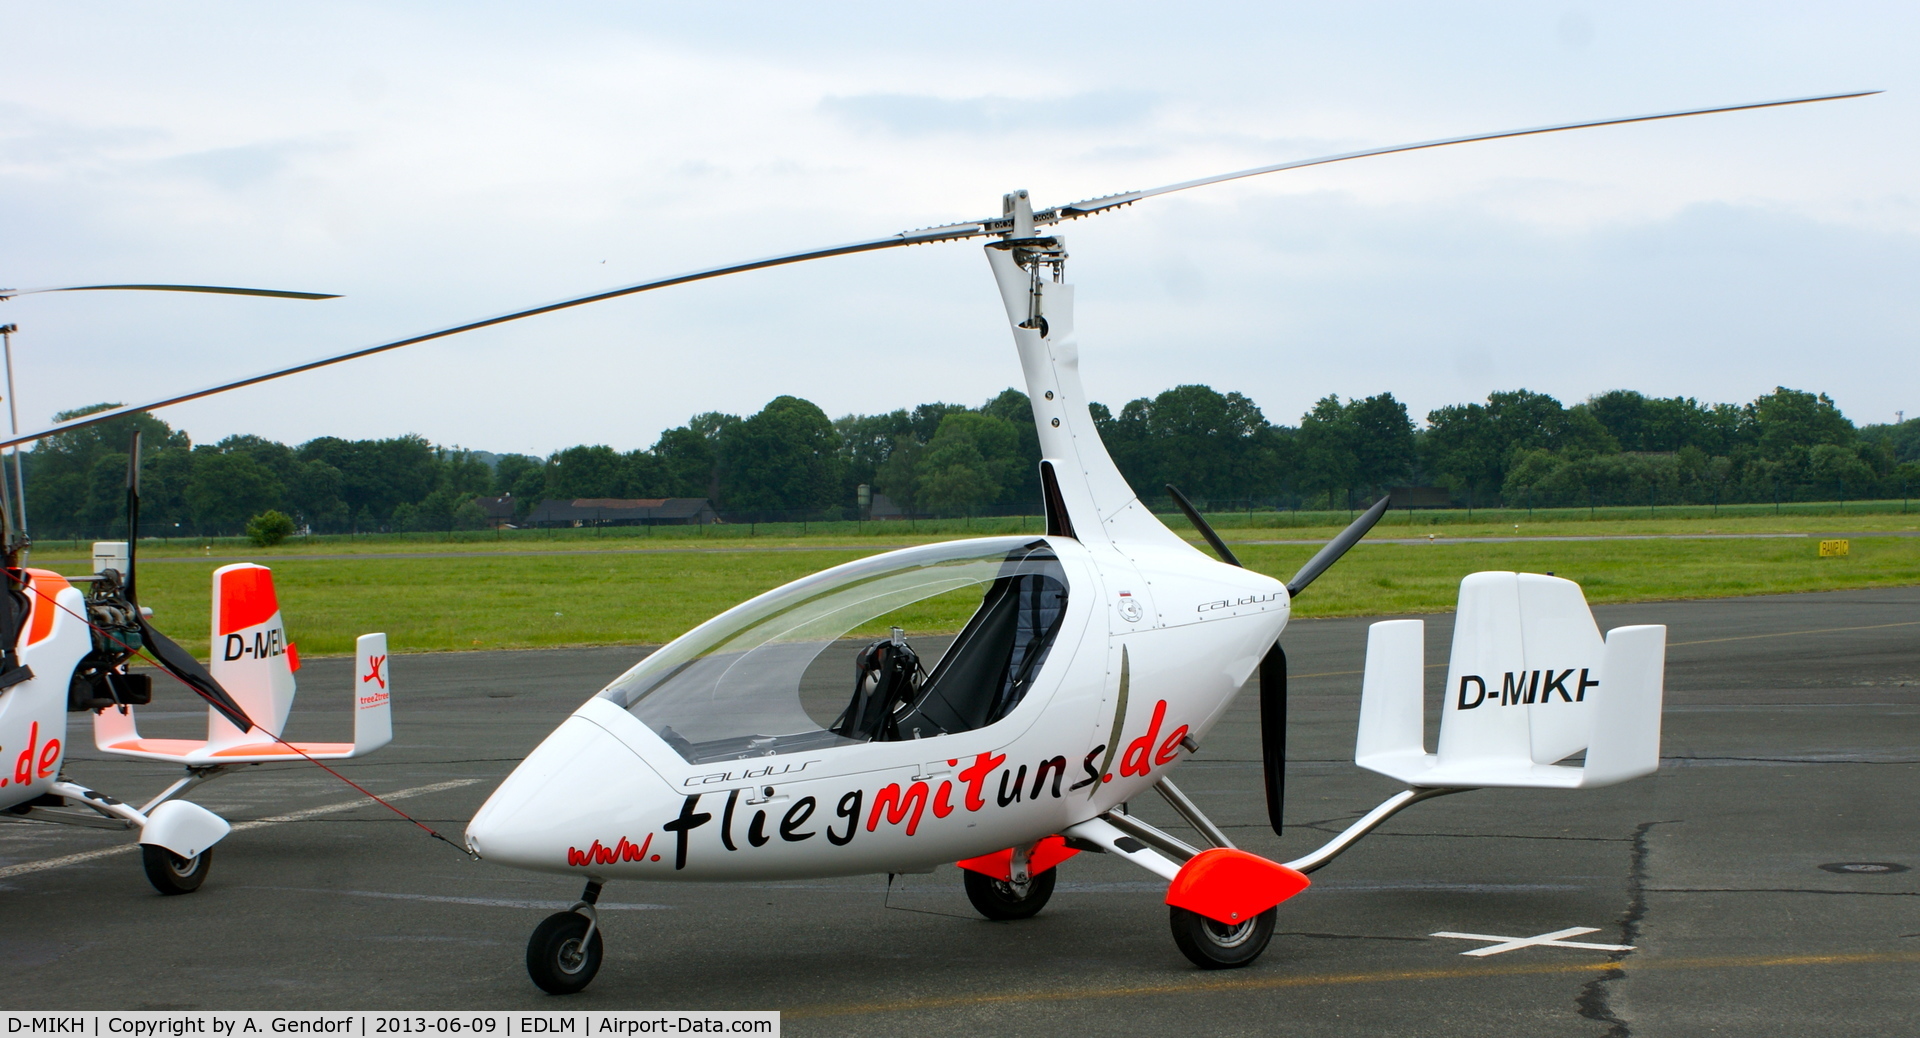 D-MIKH, AutoGyro Calidus 09 C/N Not found D-MIKH, Seen here parked on the apron at Marl-Loemühle (EDLM)